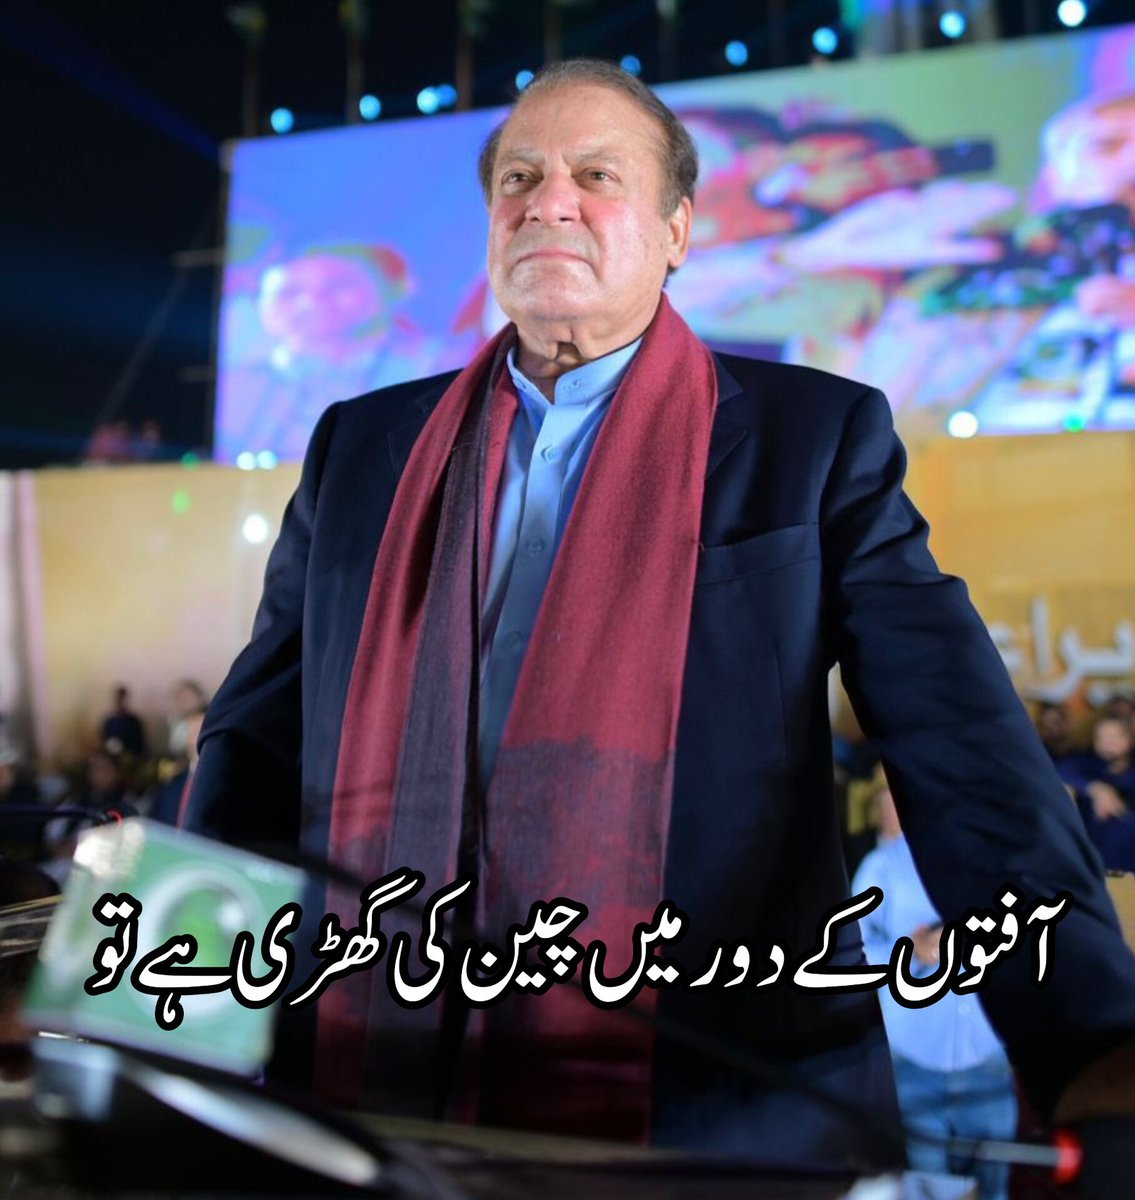 The news of peace in the time of disasters is that Quaid Nawaz Sharif is going to become the party president. #میرا_صدر_نواز_شریف